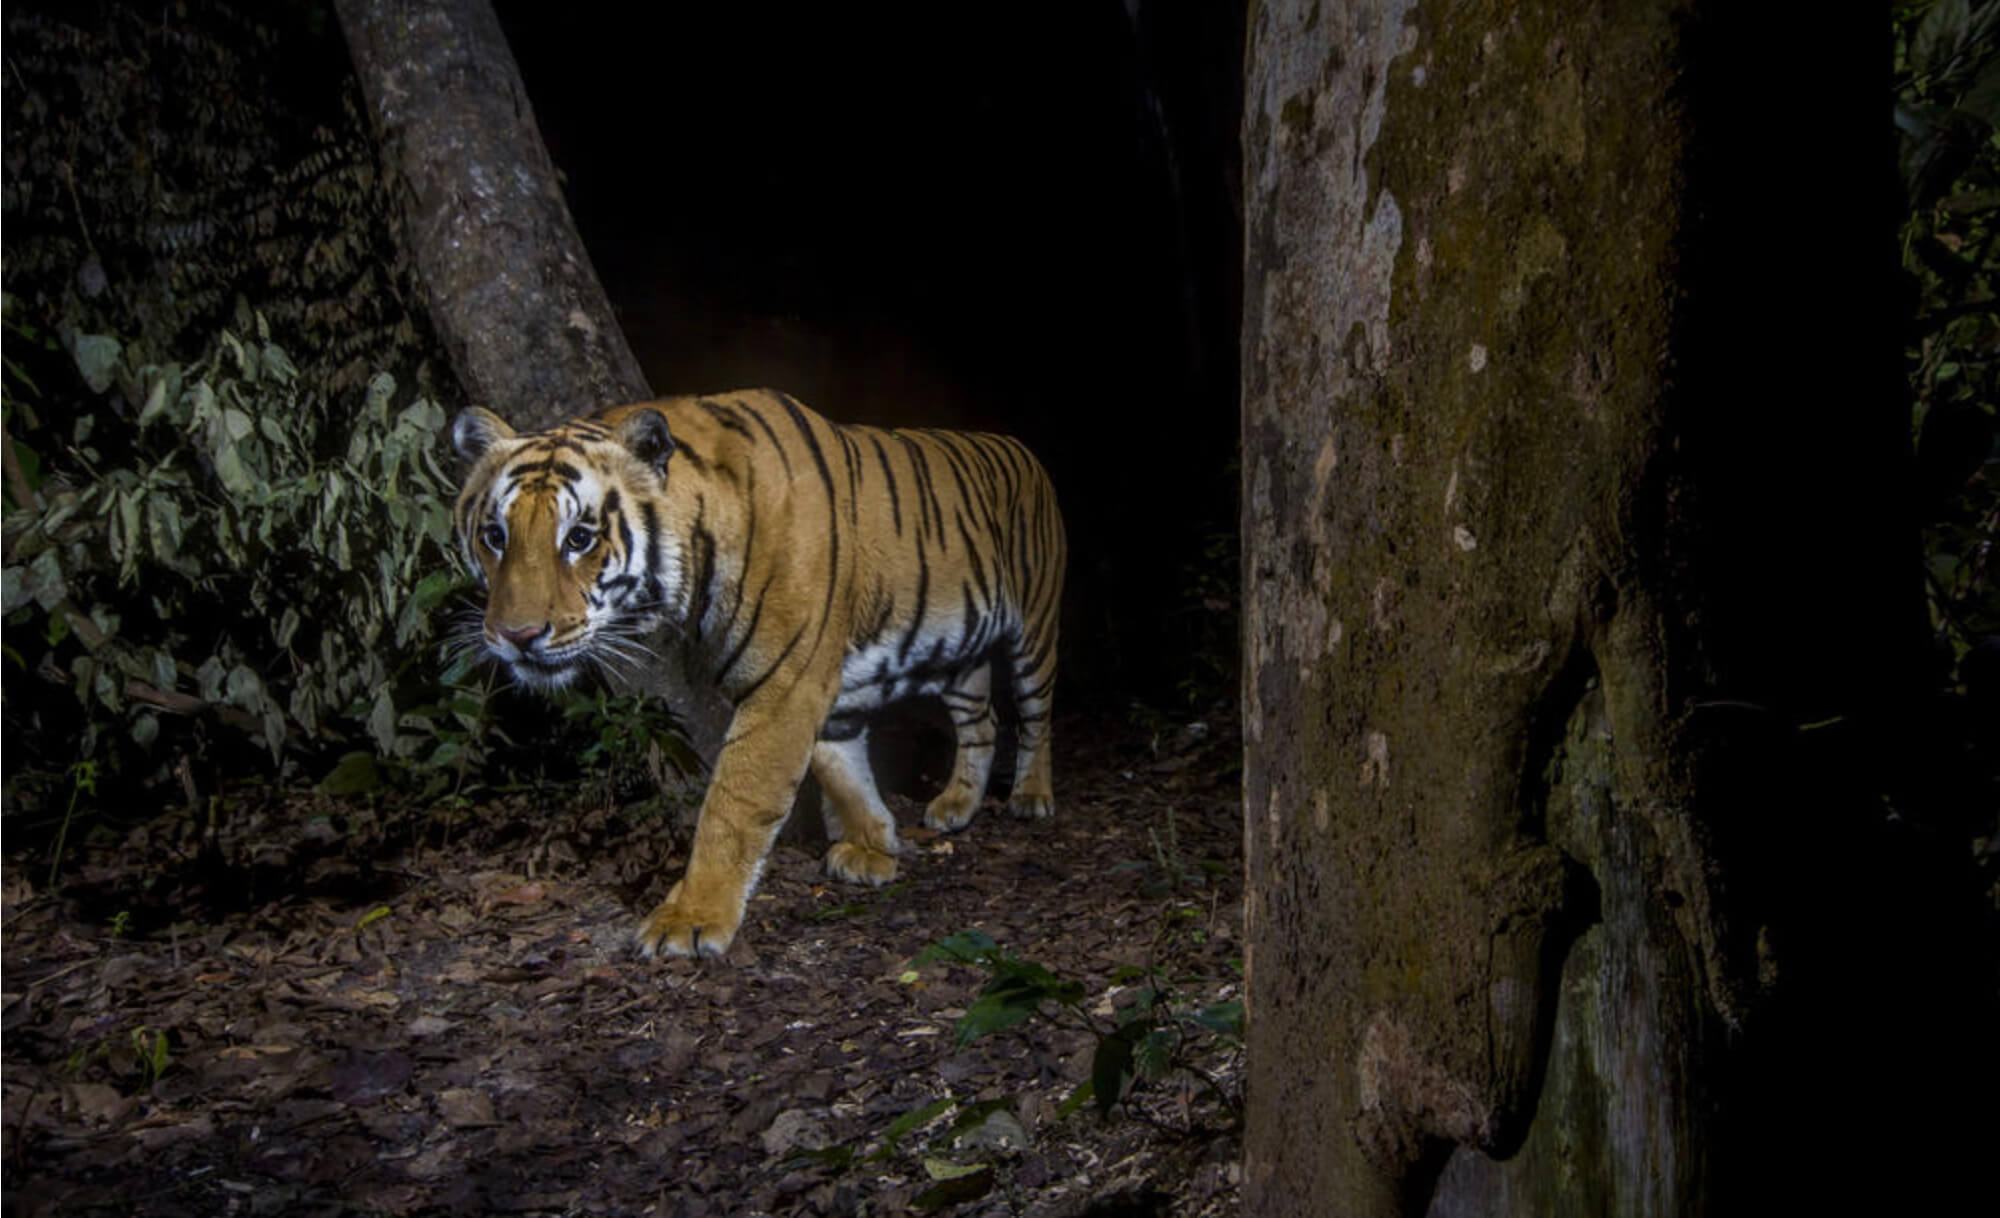 Spotted tiger found in Besisahar, released into forest